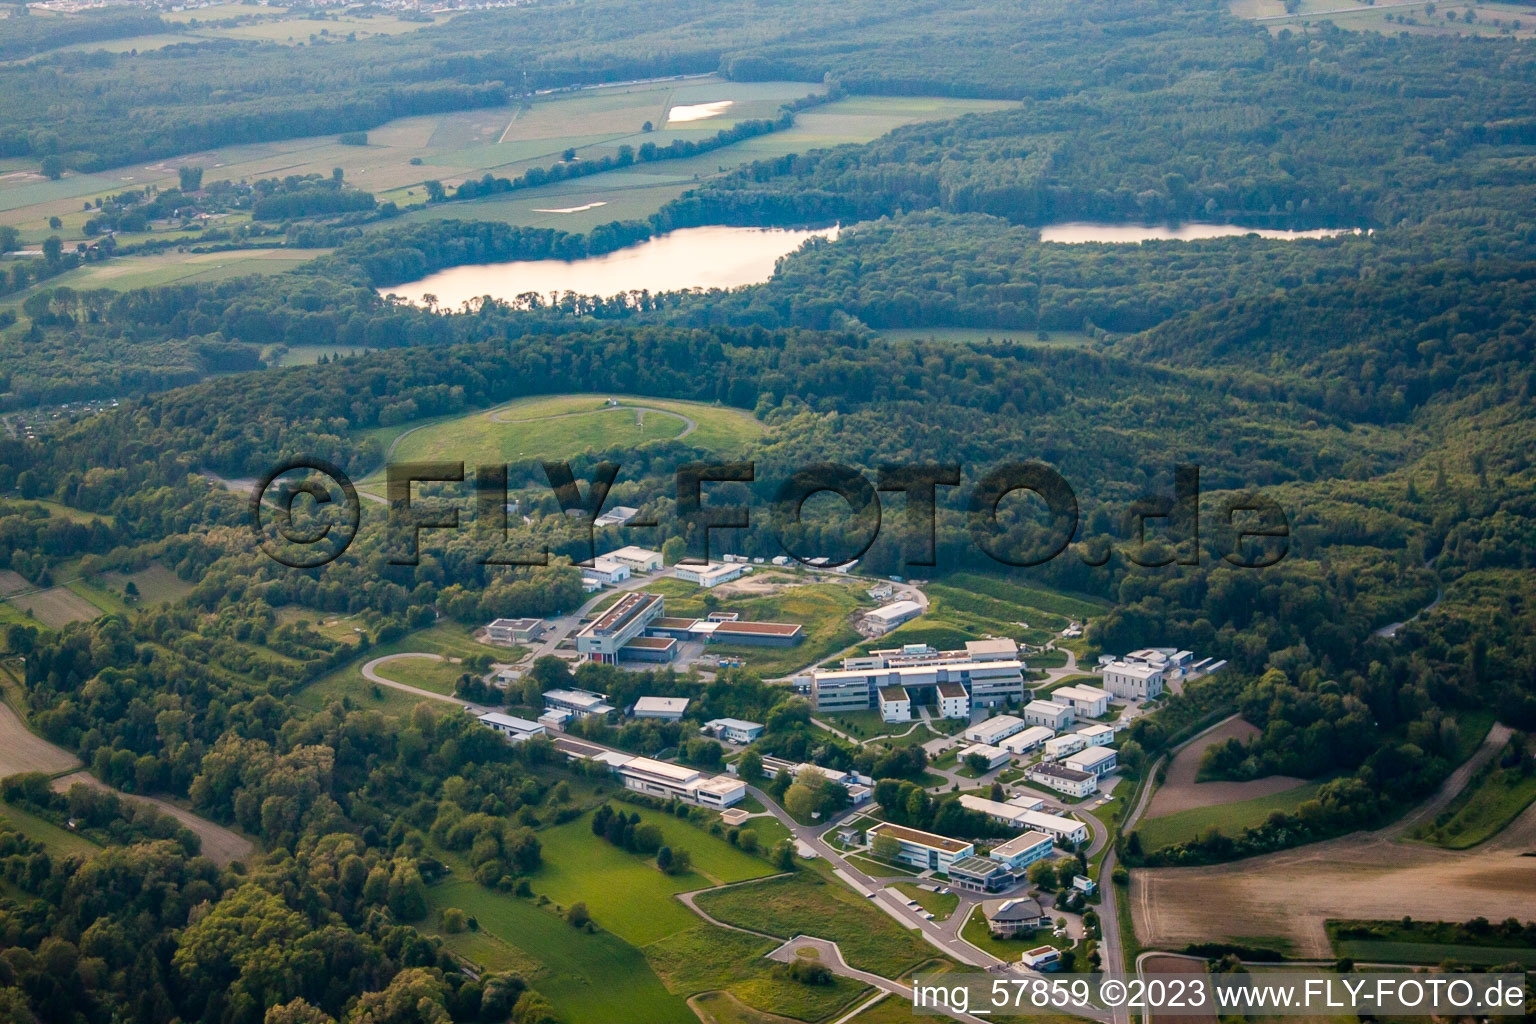 Fraunhofer Institute in the district Grötzingen in Karlsruhe in the state Baden-Wuerttemberg, Germany from above